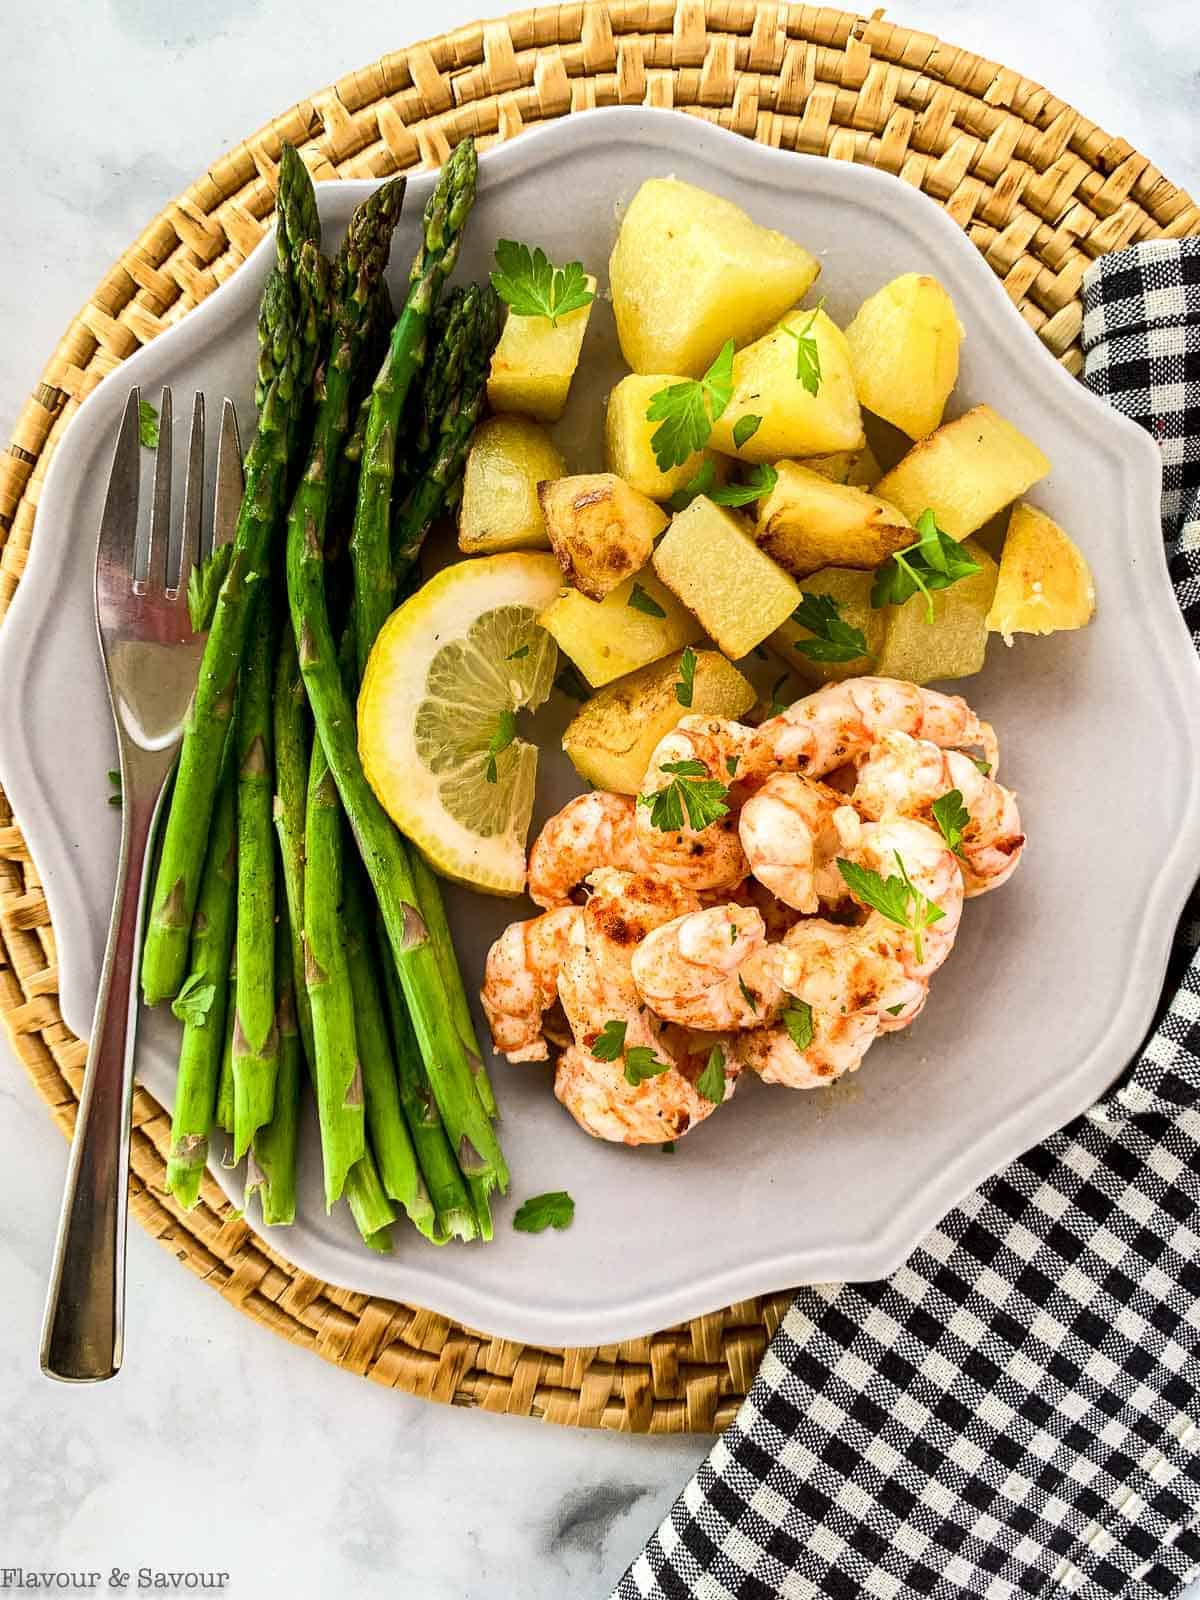 Sheet Pan Lemon Garlic Prawns with asparagus and roasted potatoes on a gray plate.